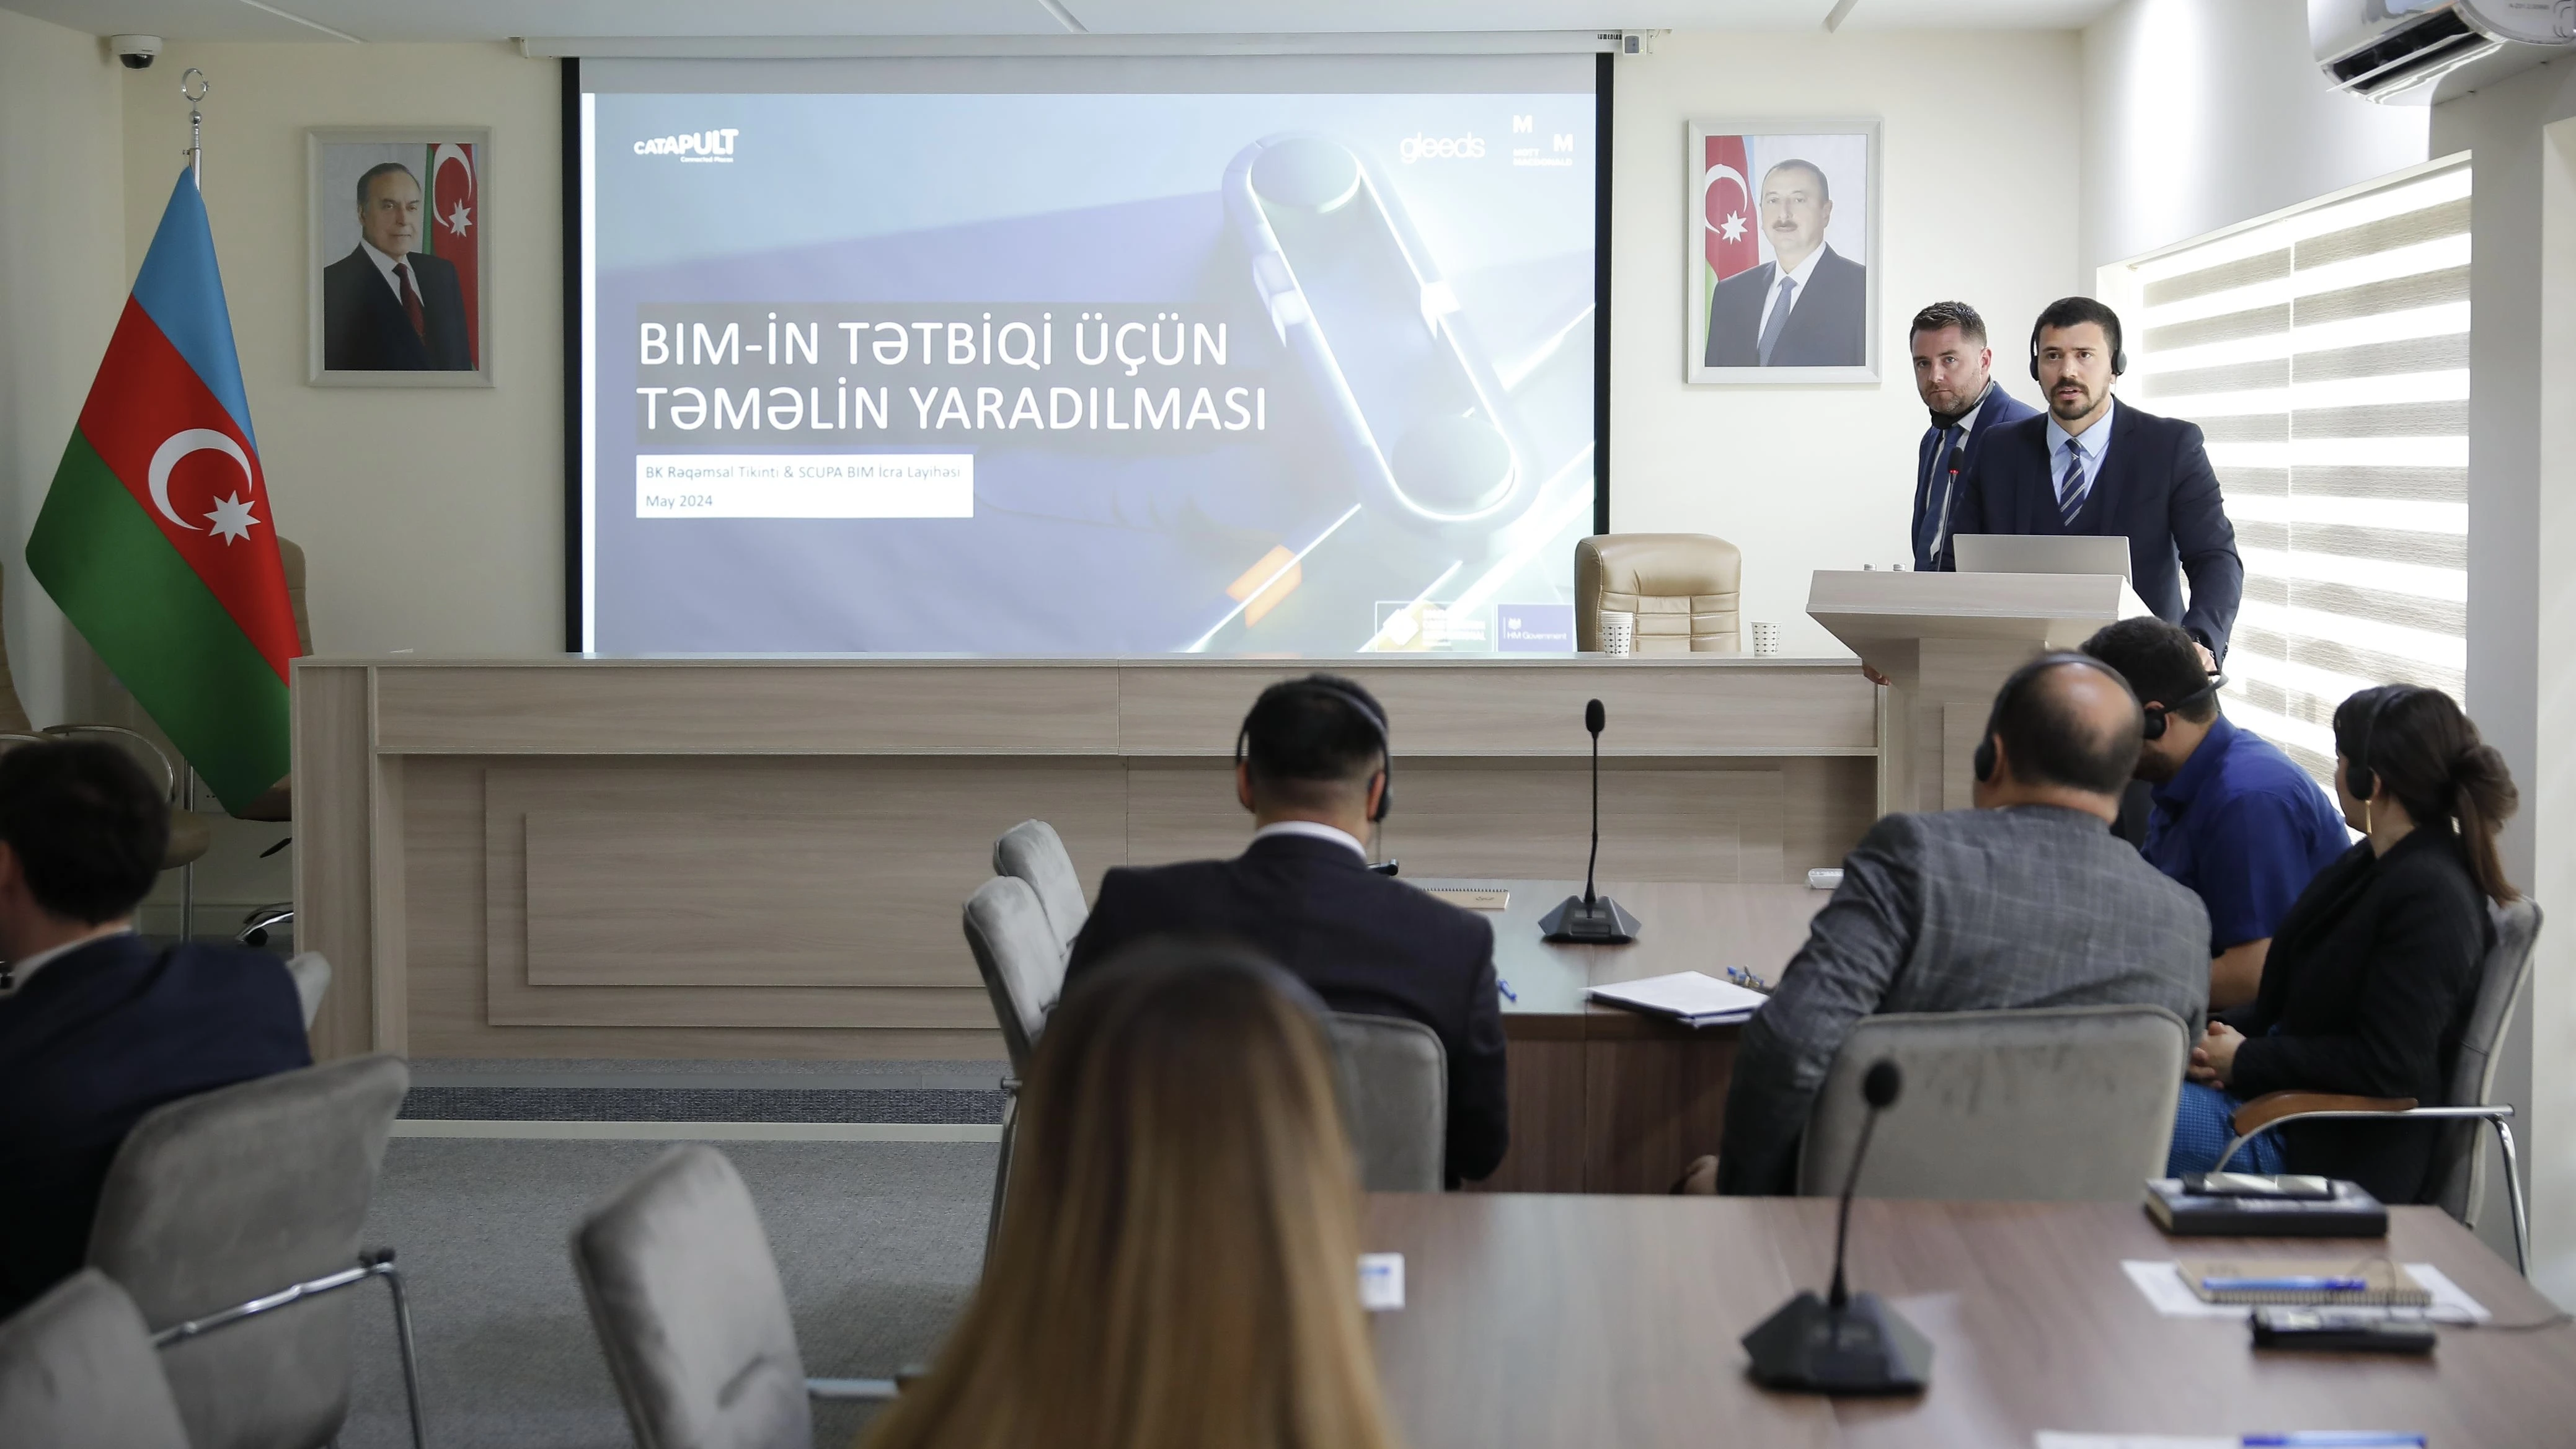 A training session on the application of BIM technologies is being held by the Committee